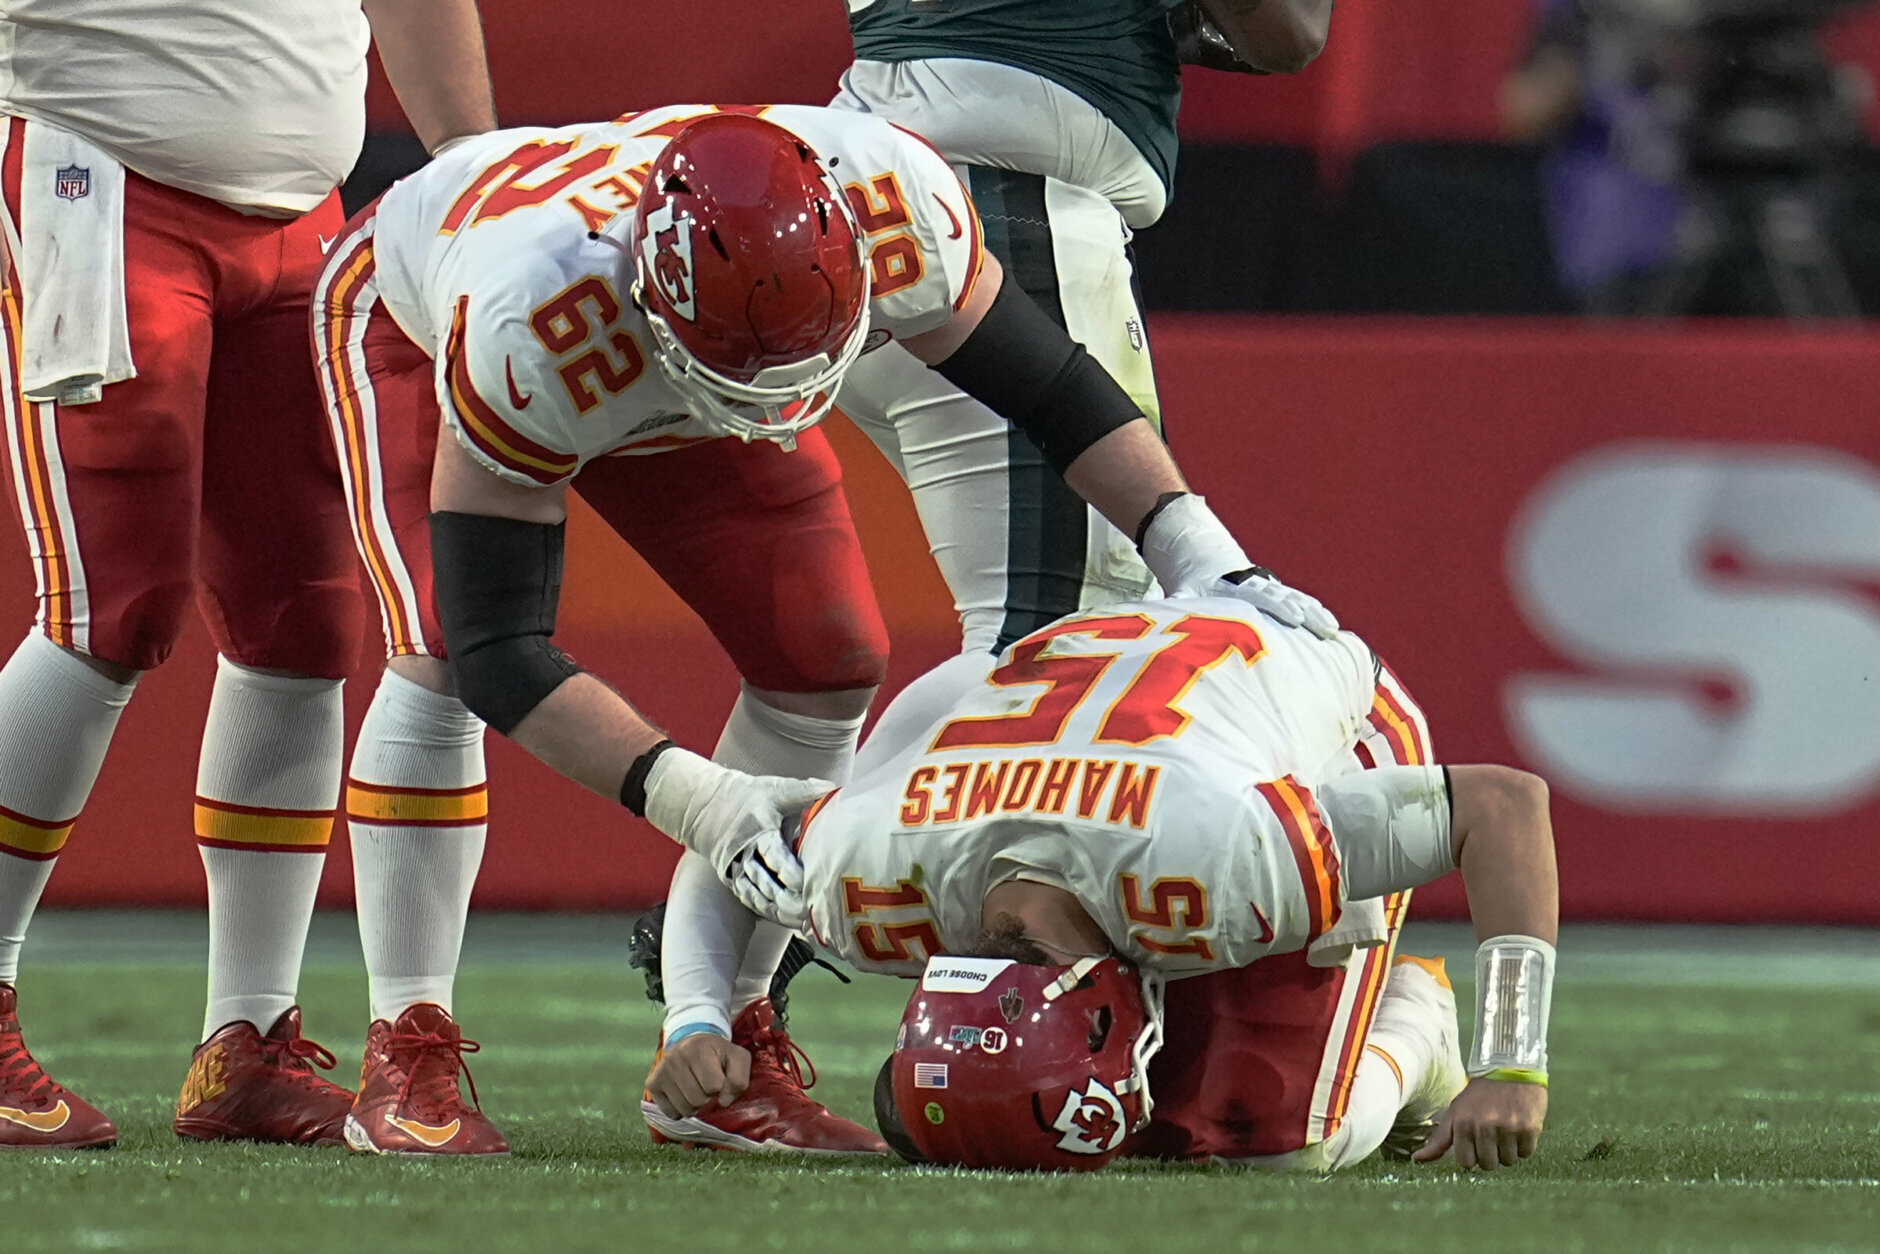 Kansas City Chiefs quarterback Patrick Mahomes (15) reacts after getting hurt during the first half of the NFL Super Bowl 57 football game between the Kansas City Chiefs and the Philadelphia Eagles, Sunday, Feb. 12, 2023, in Glendale, Ariz. (AP Photo/Abbie Parr)